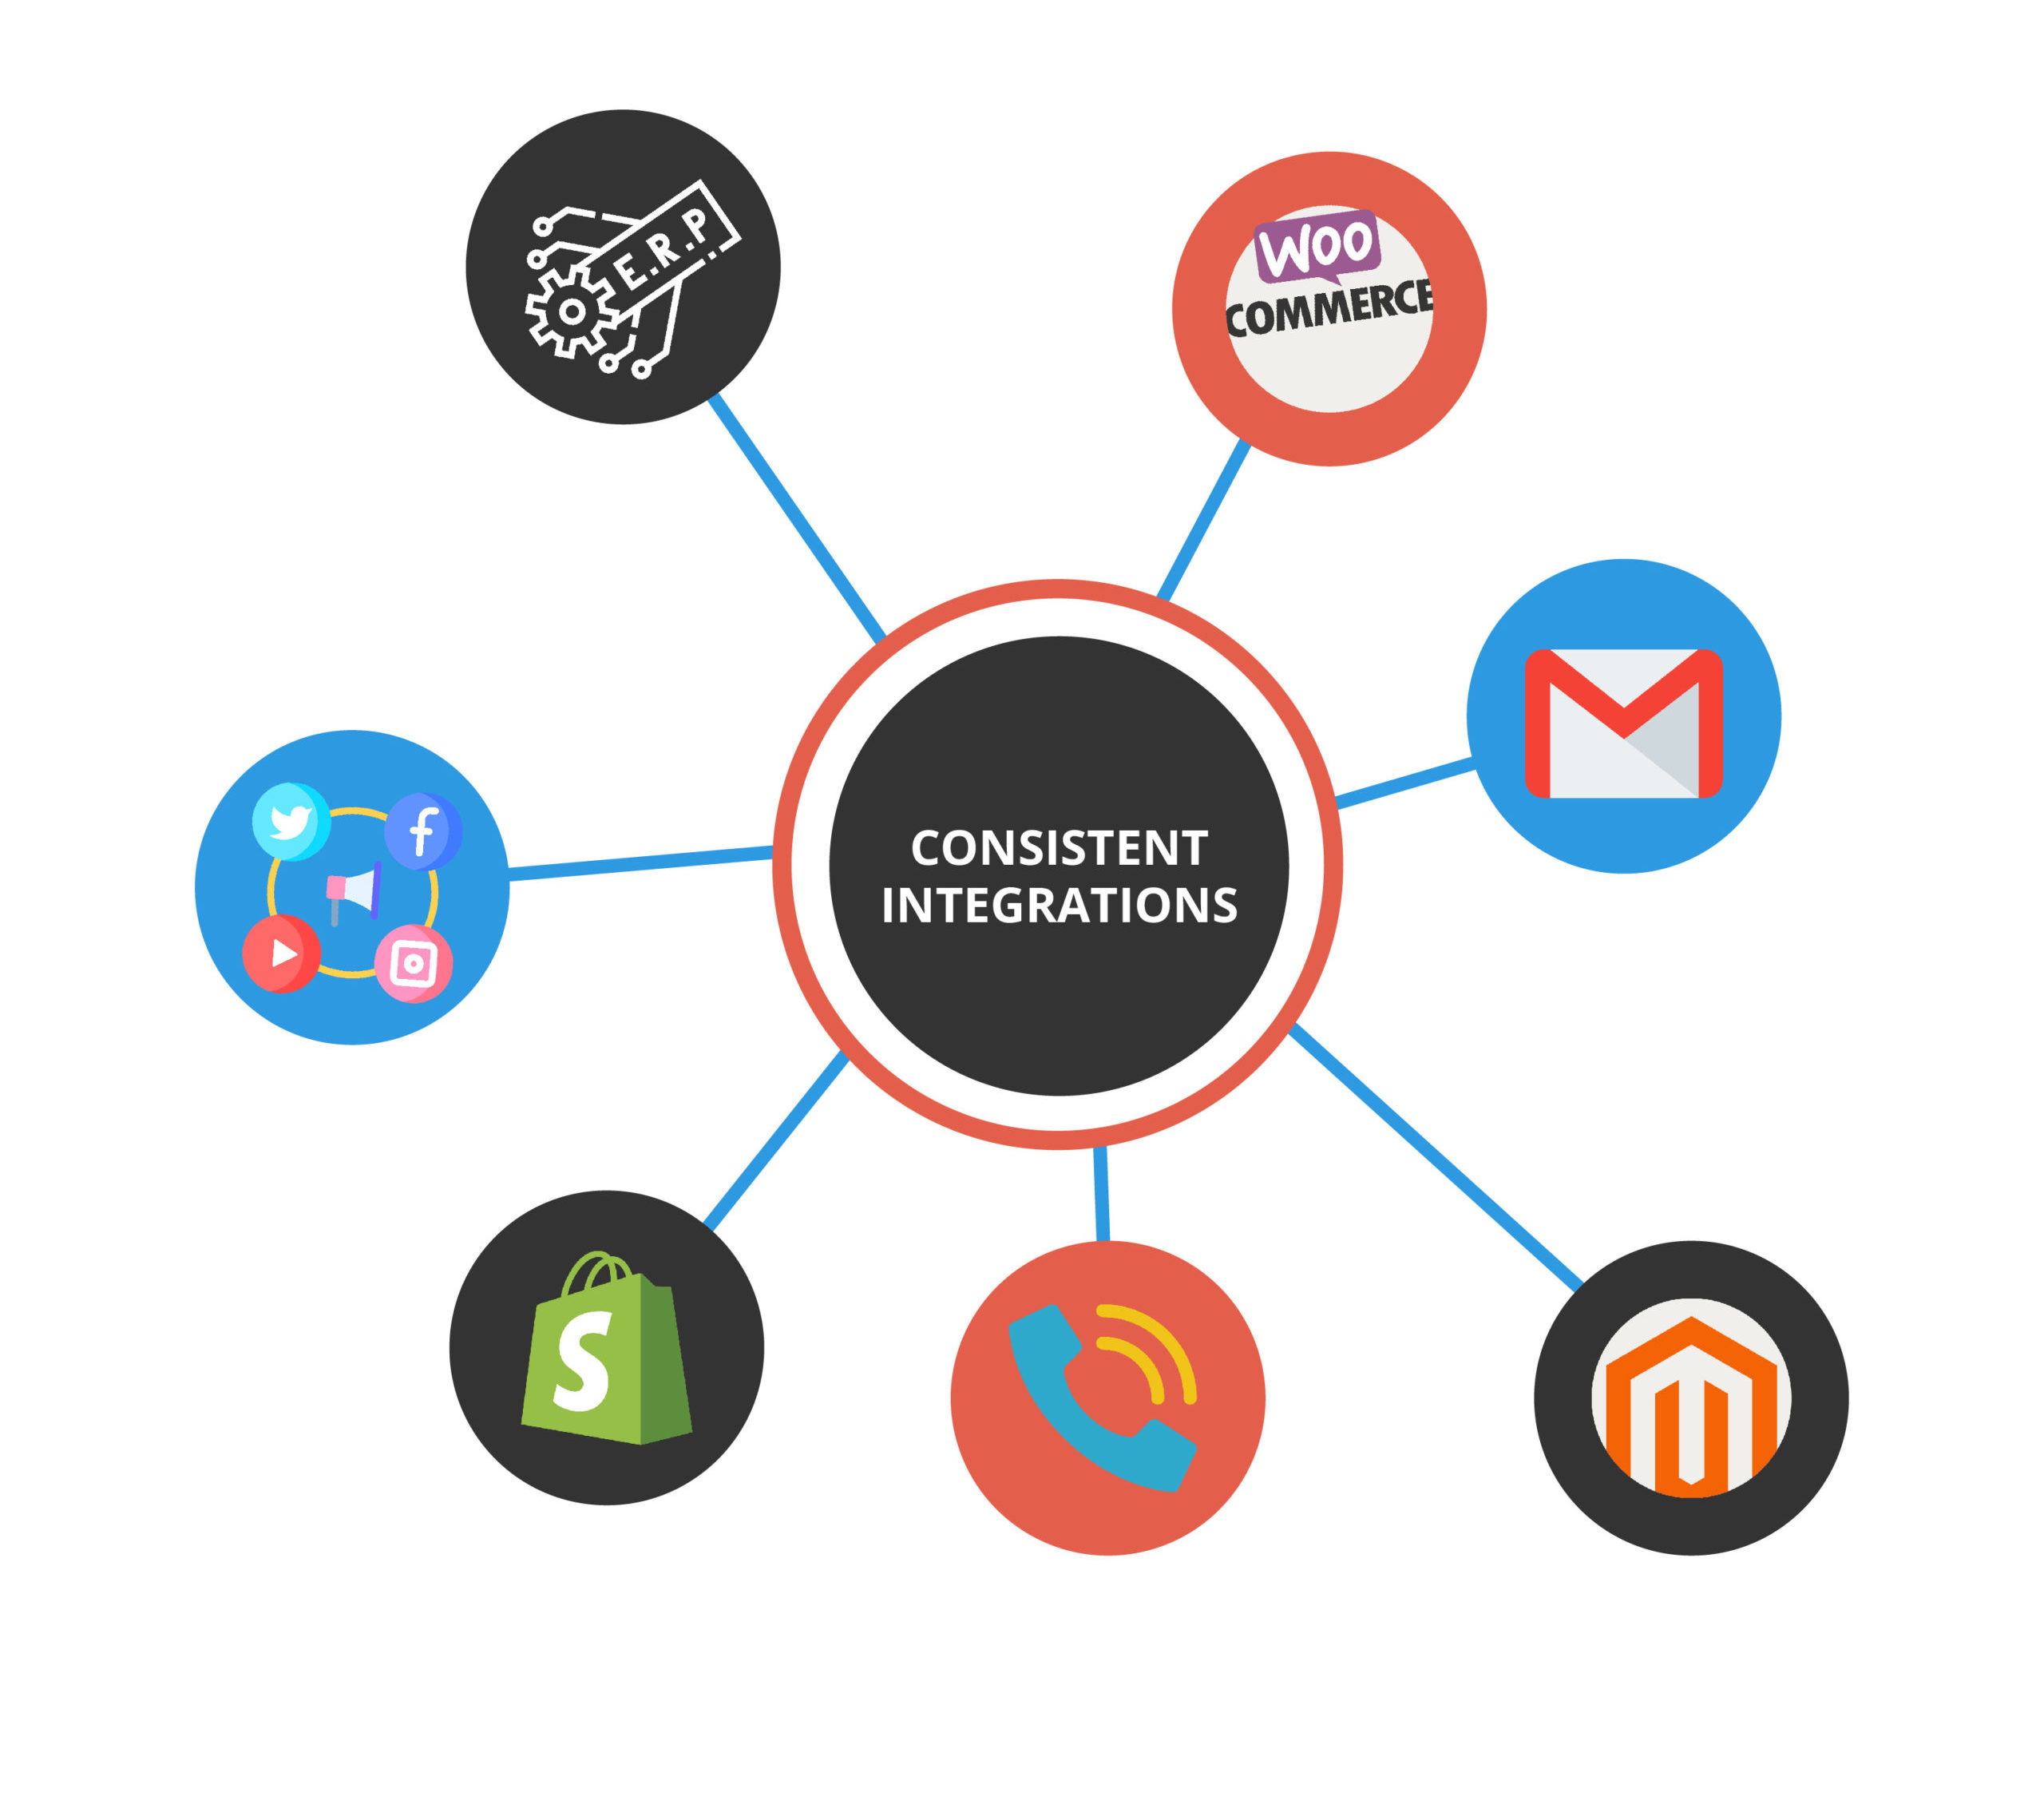 CONSISTENT INTEGRATIONS are essential to ensure seamless connectivity and functionality across various platforms